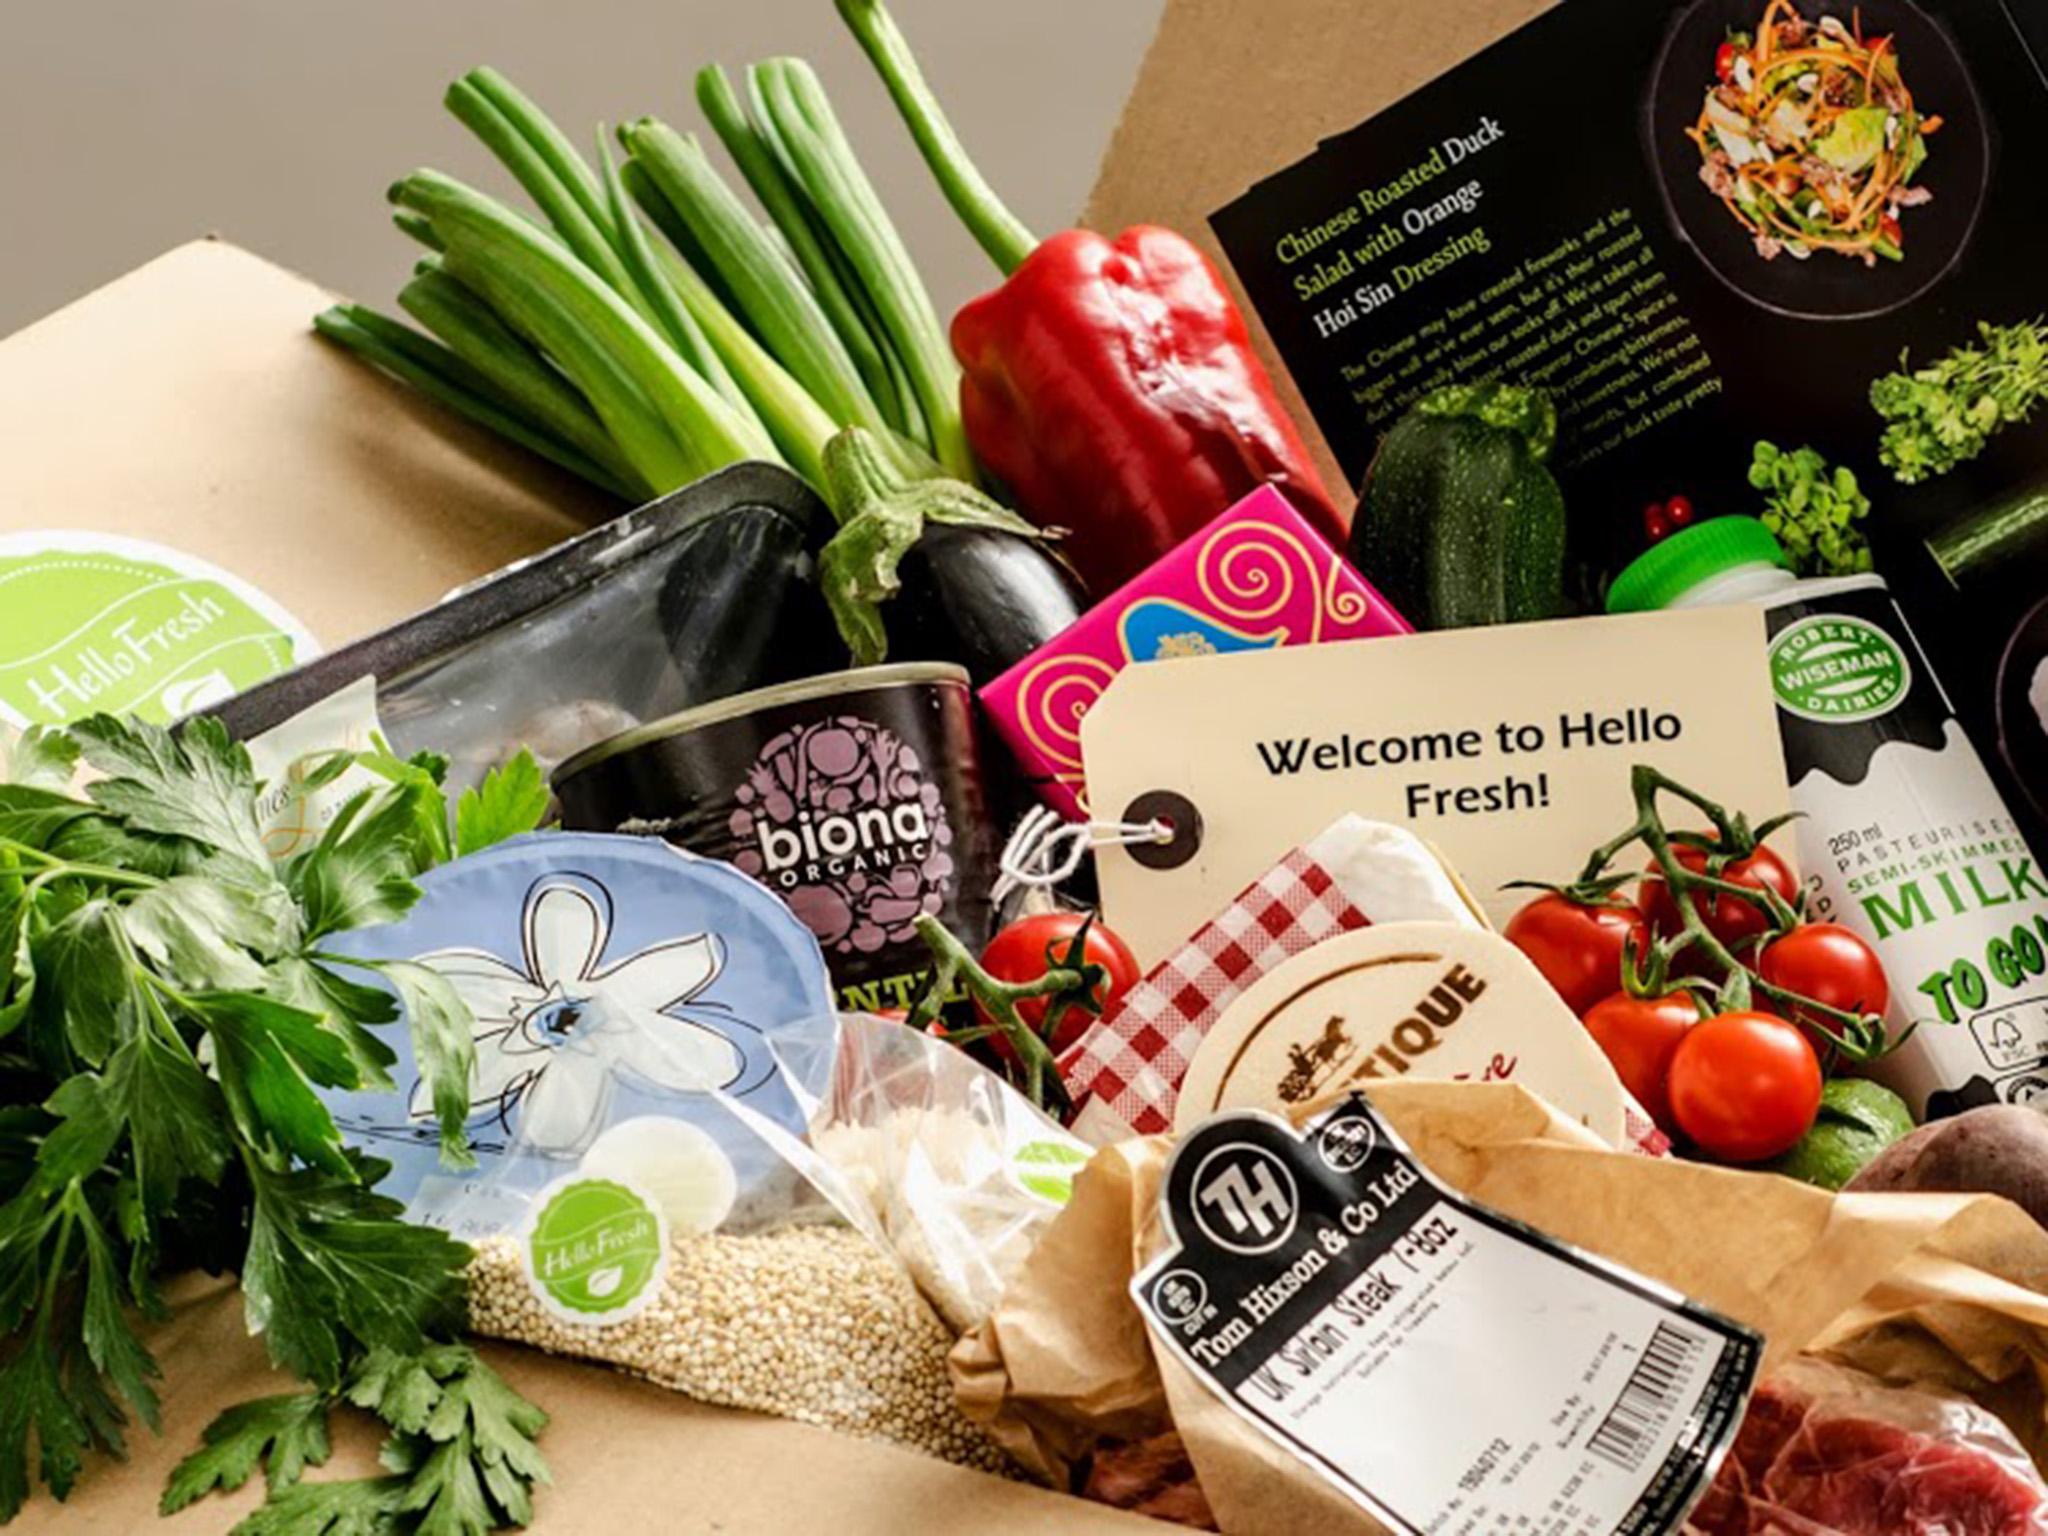 HelloFresh assembles ingredients into boxed meal kits and delivers them to customers